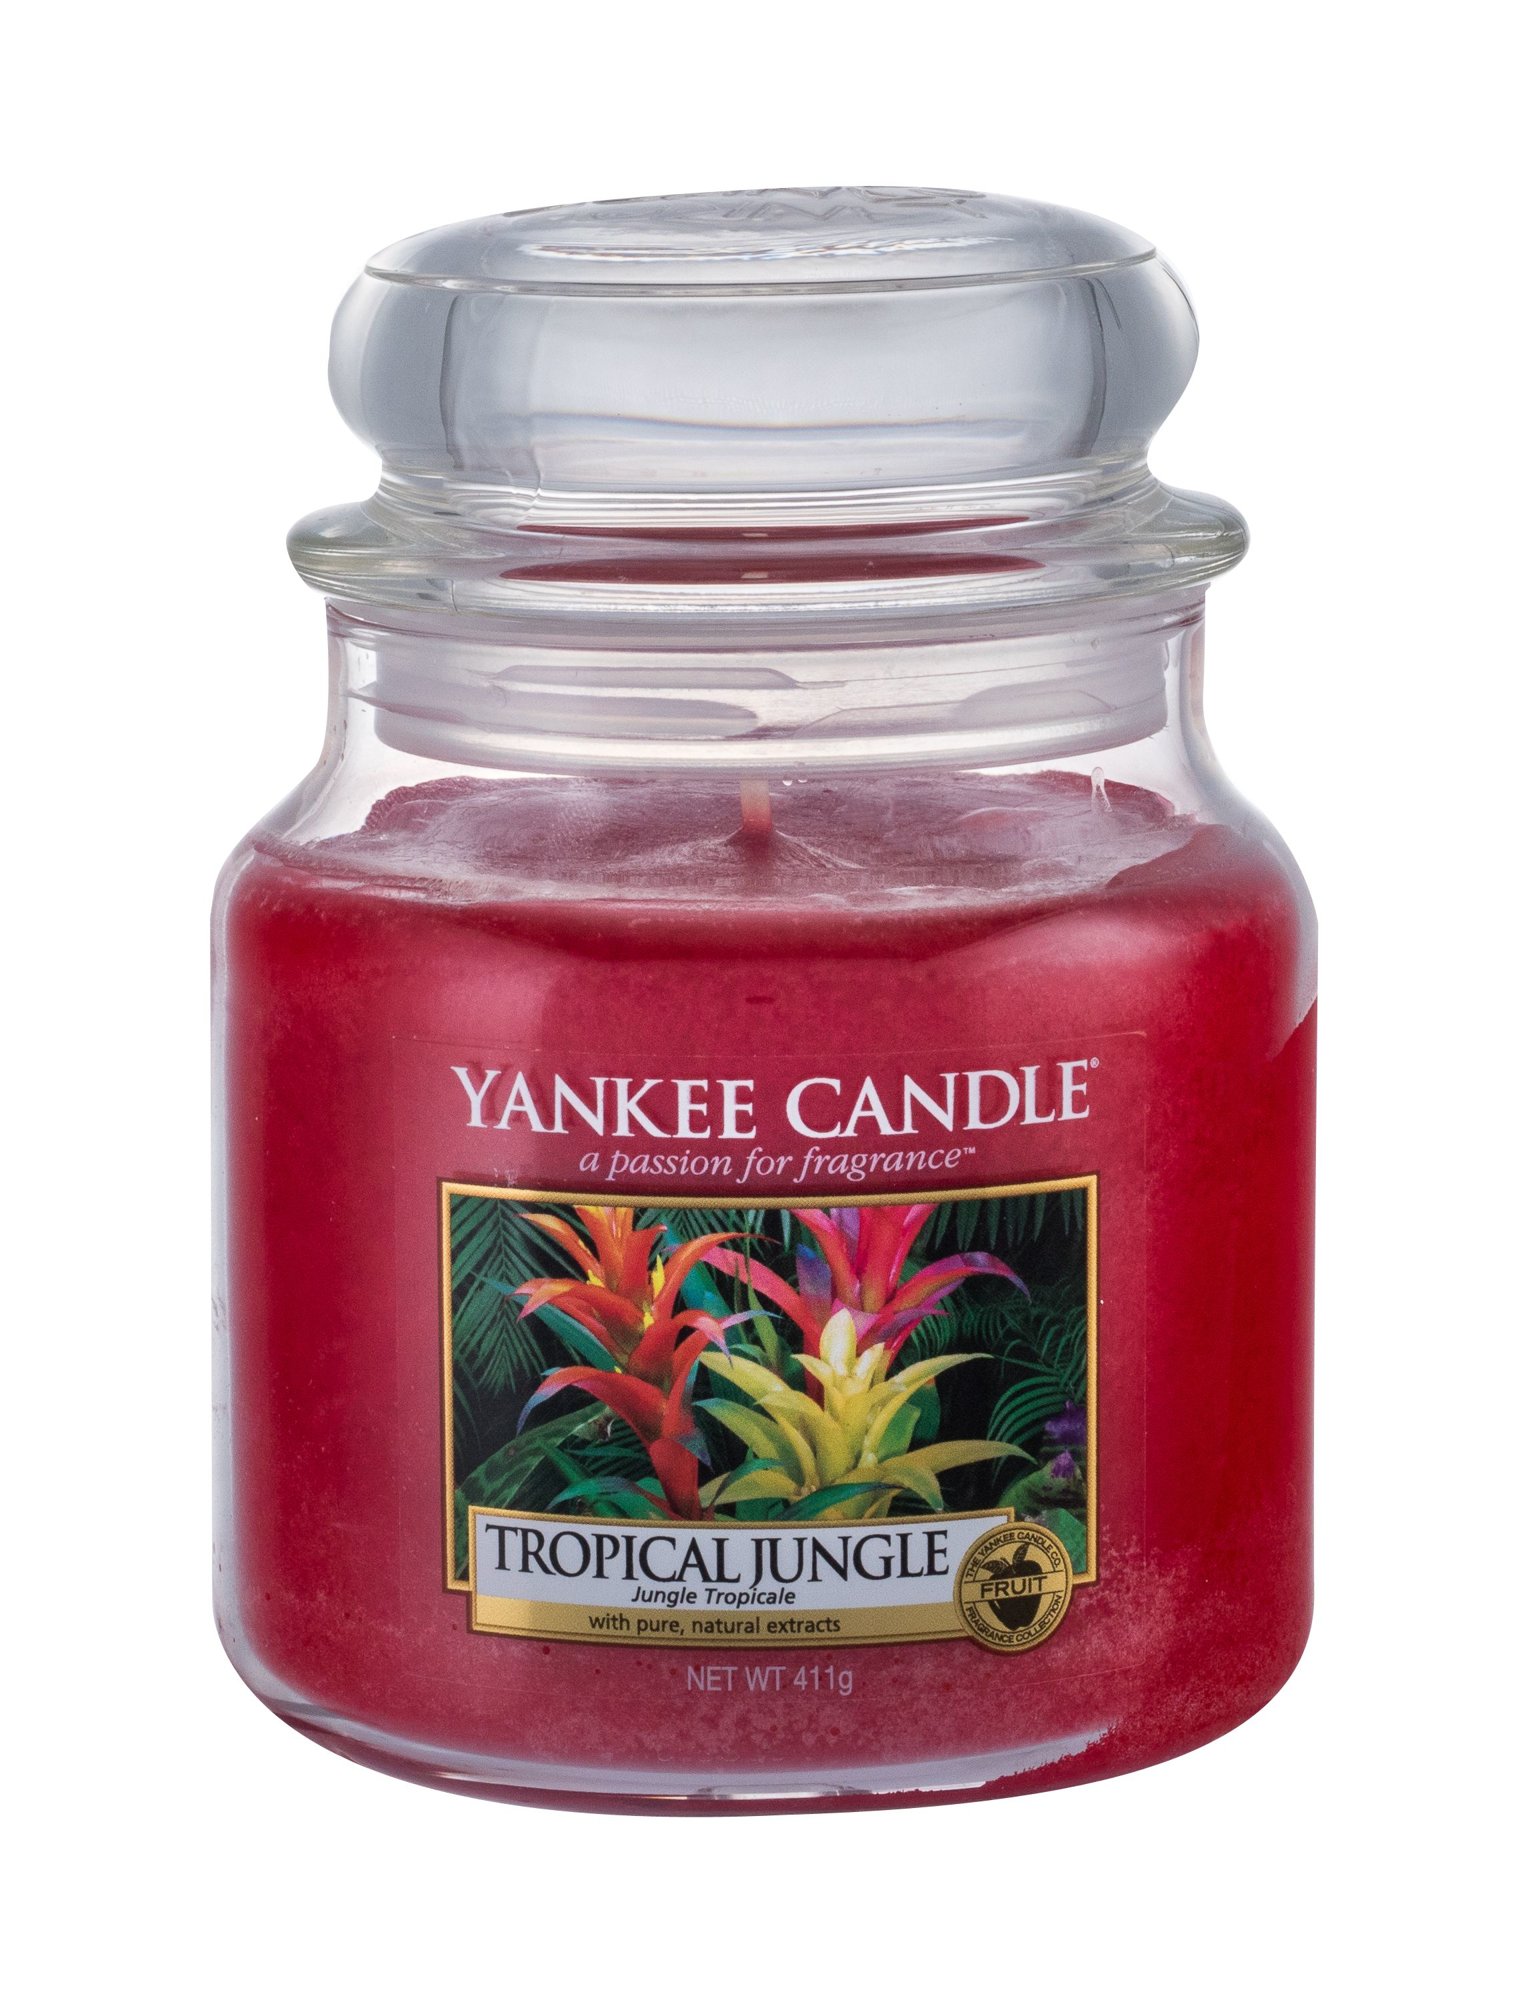 Yankee Candle Tropical Jungle 411g Kvepalai Unisex Scented Candle